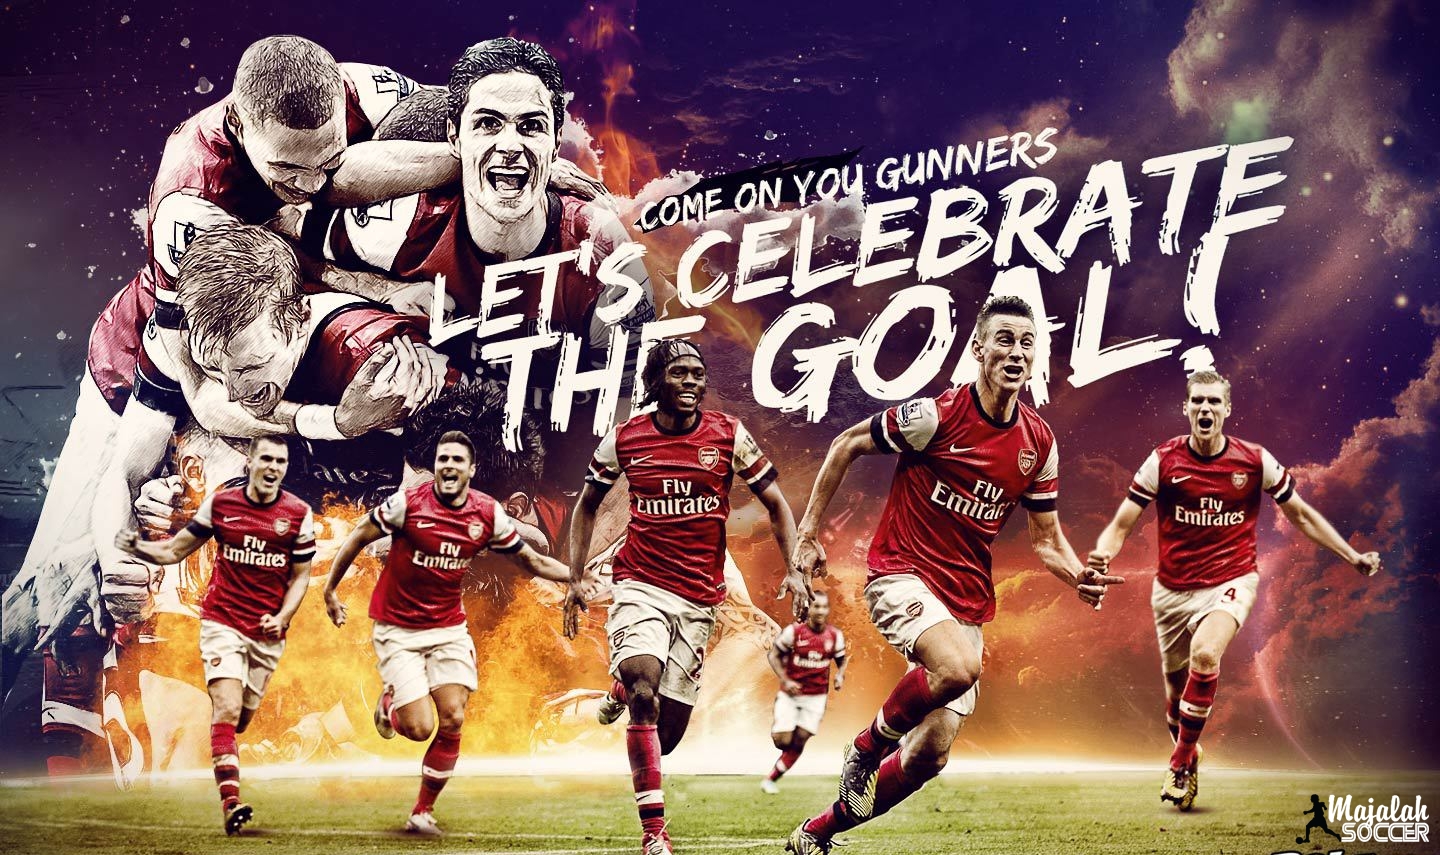 arsenal players wallpaper,player,team,football player,rugby,tournament